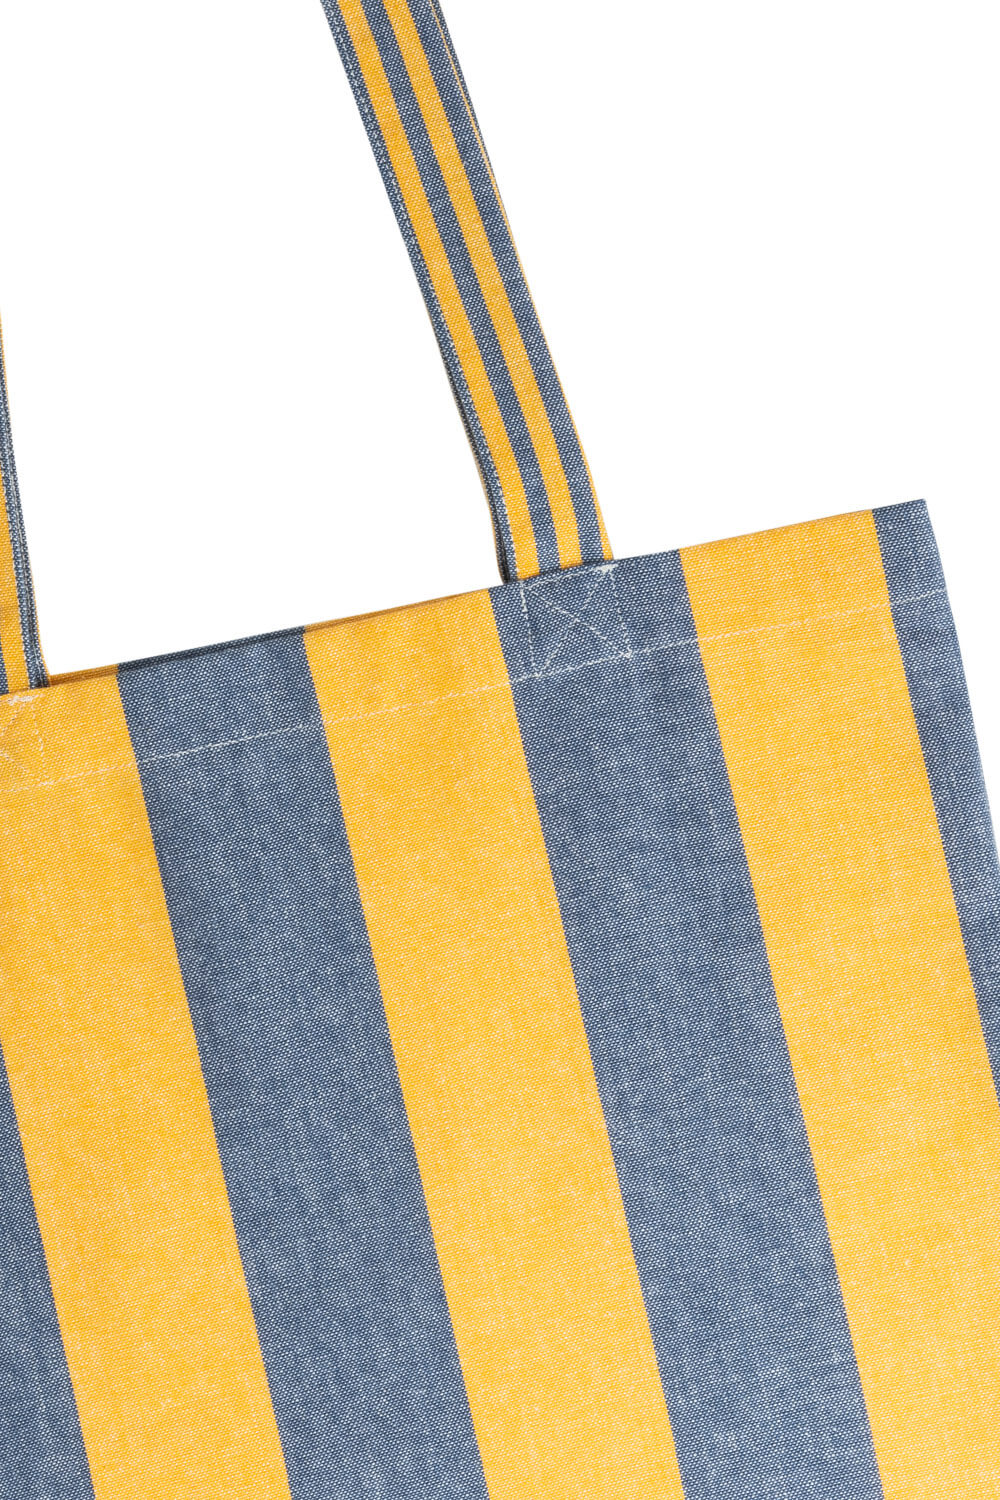 Shopping Bag in Yellow & Blue Stripes